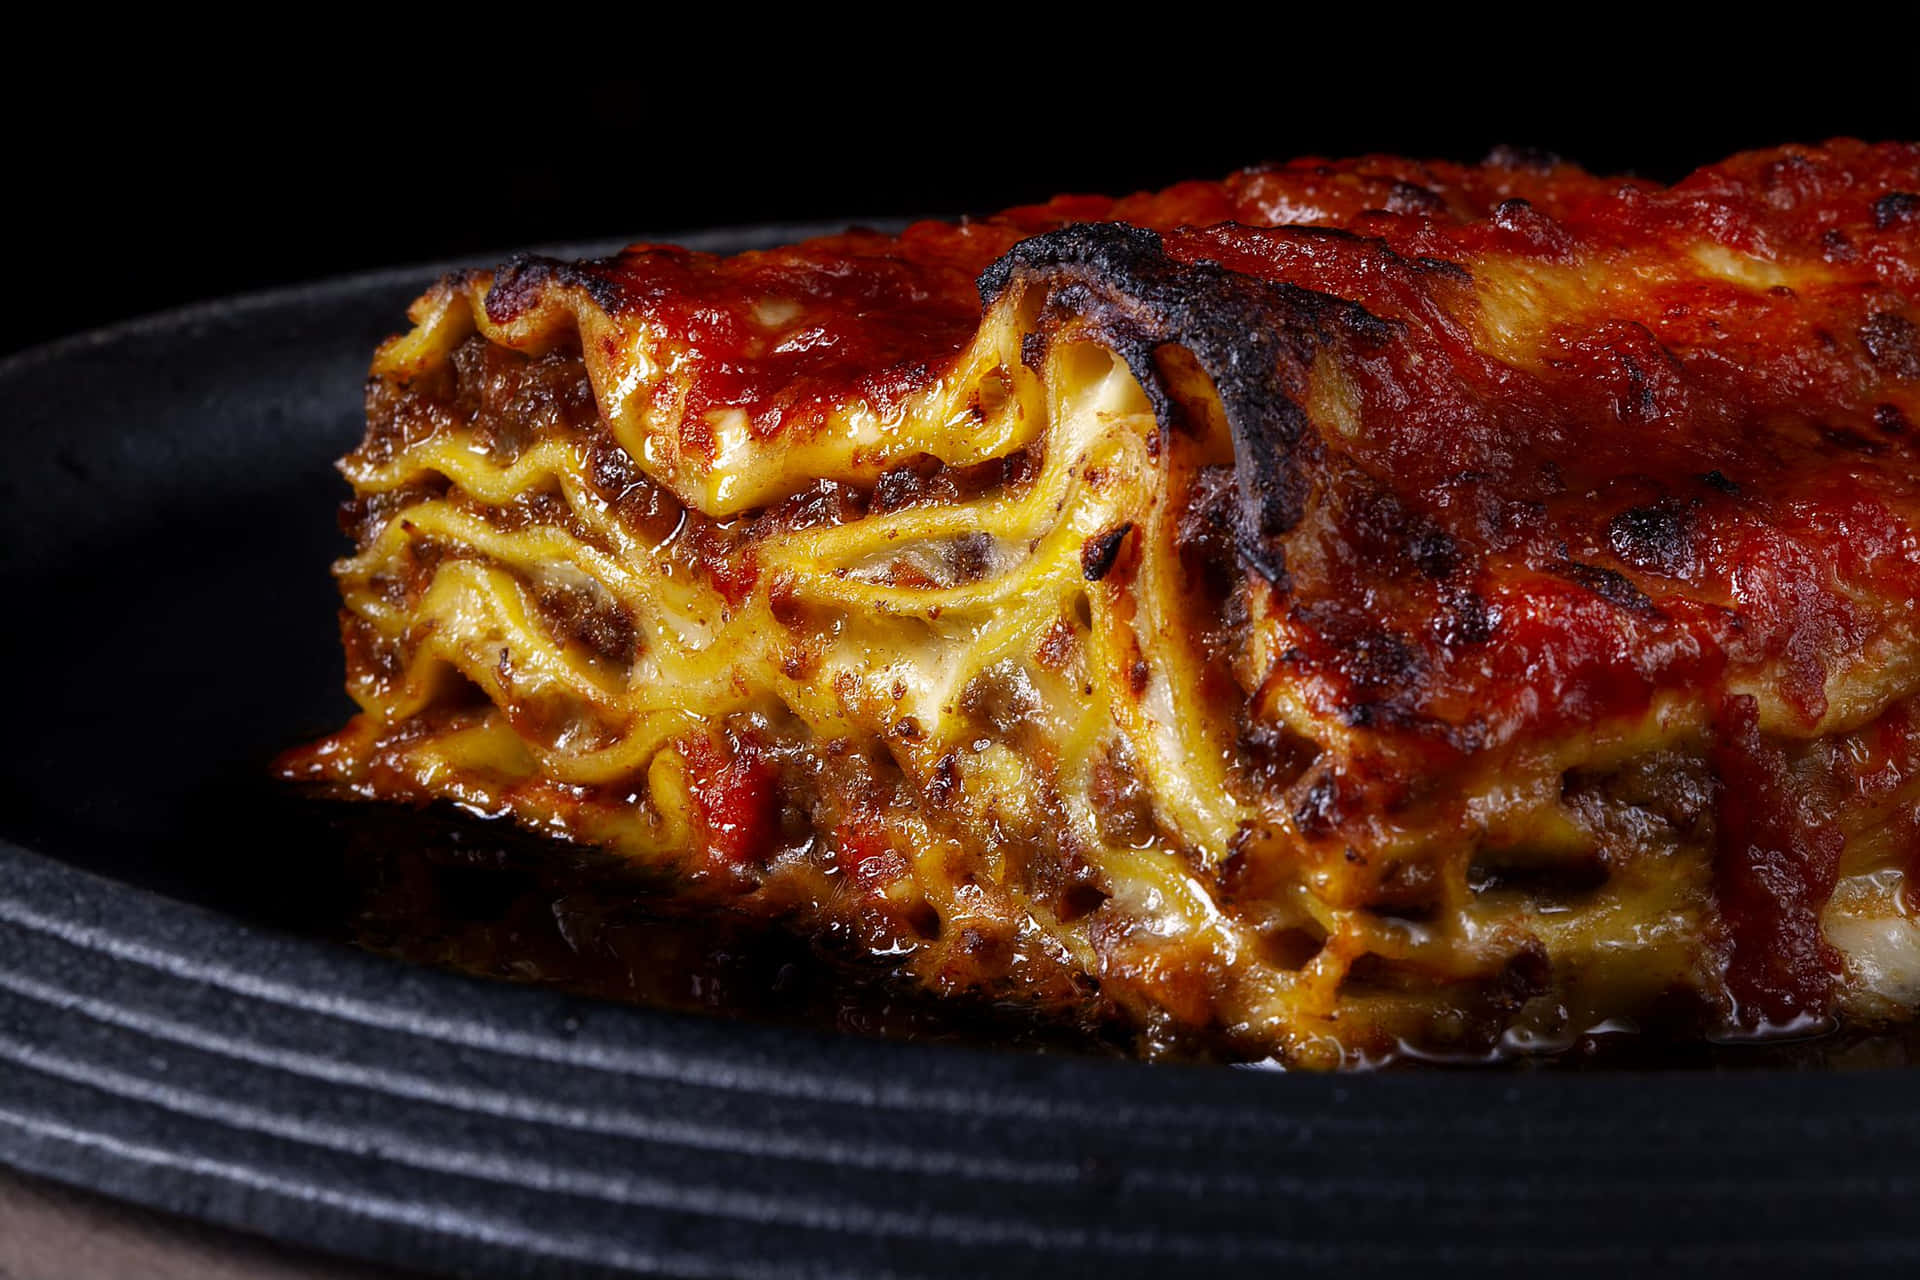 "Delicious Lasagna Alla Bolognese with Gooey Cheese and Perfectly Burnt Edges" Wallpaper